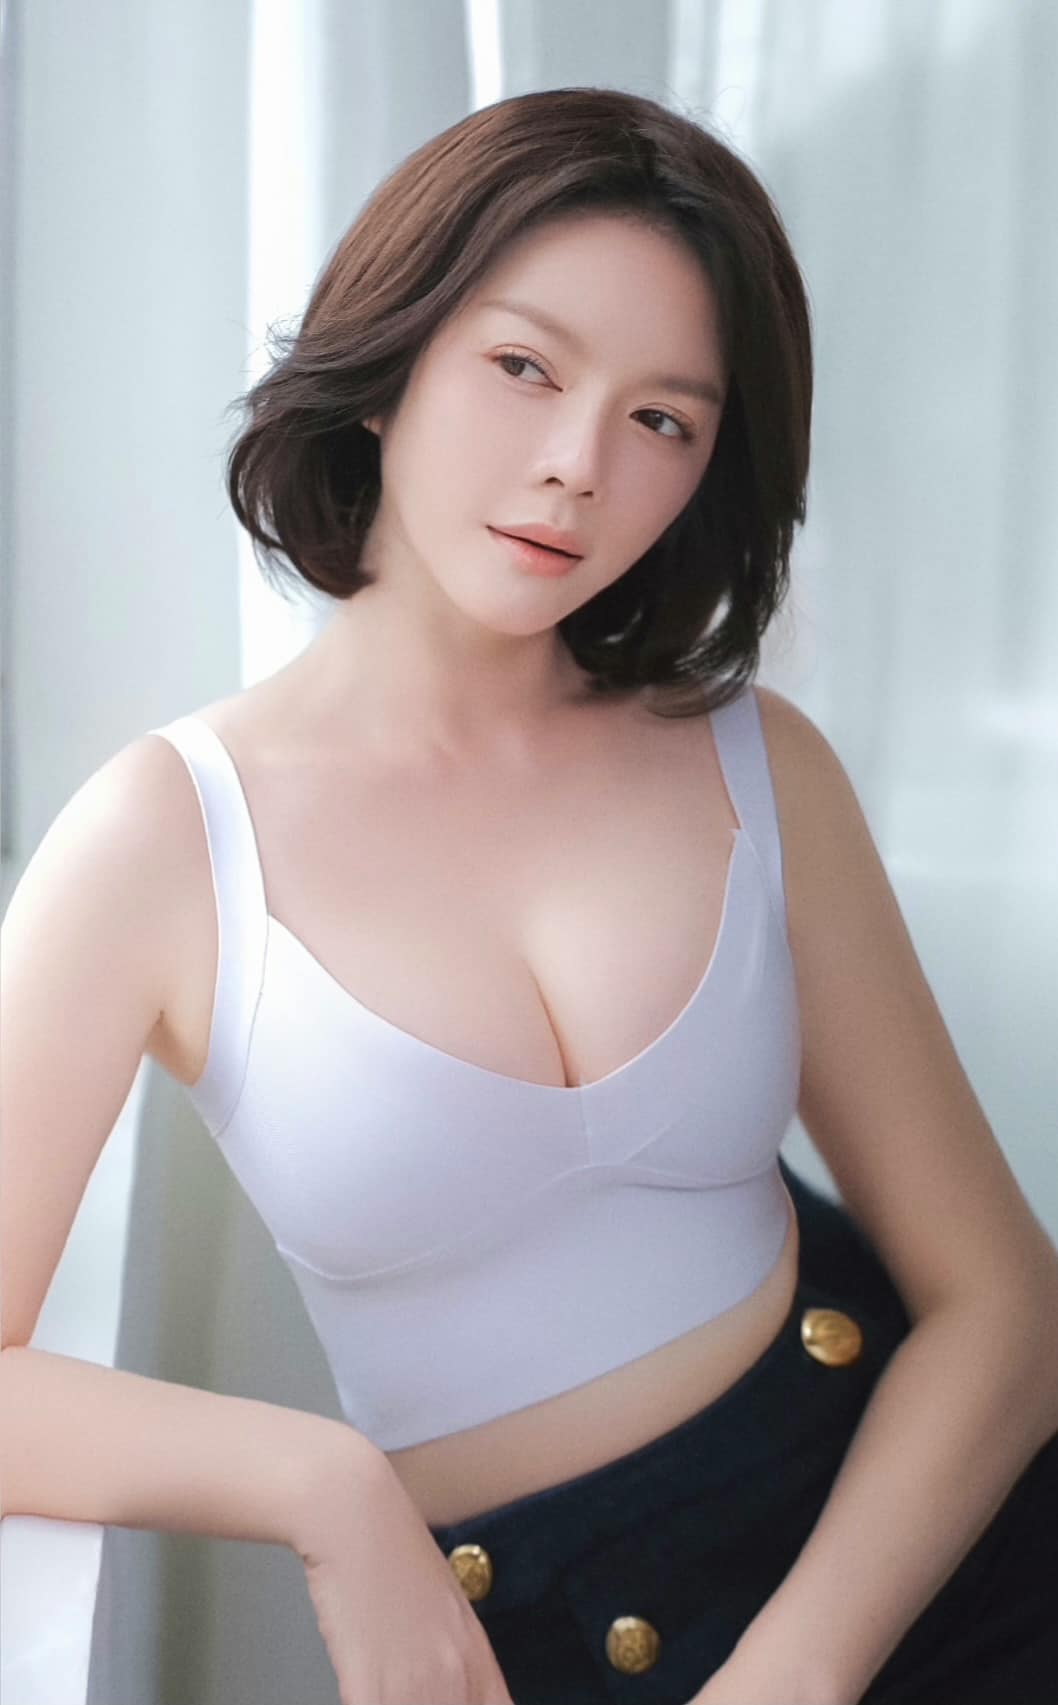 As paradoxical as Ly Nha Ky: The beautiful woman at the age of 40 still shows off her fierce bust, but behind the scenes she covers it up - Photo 3.